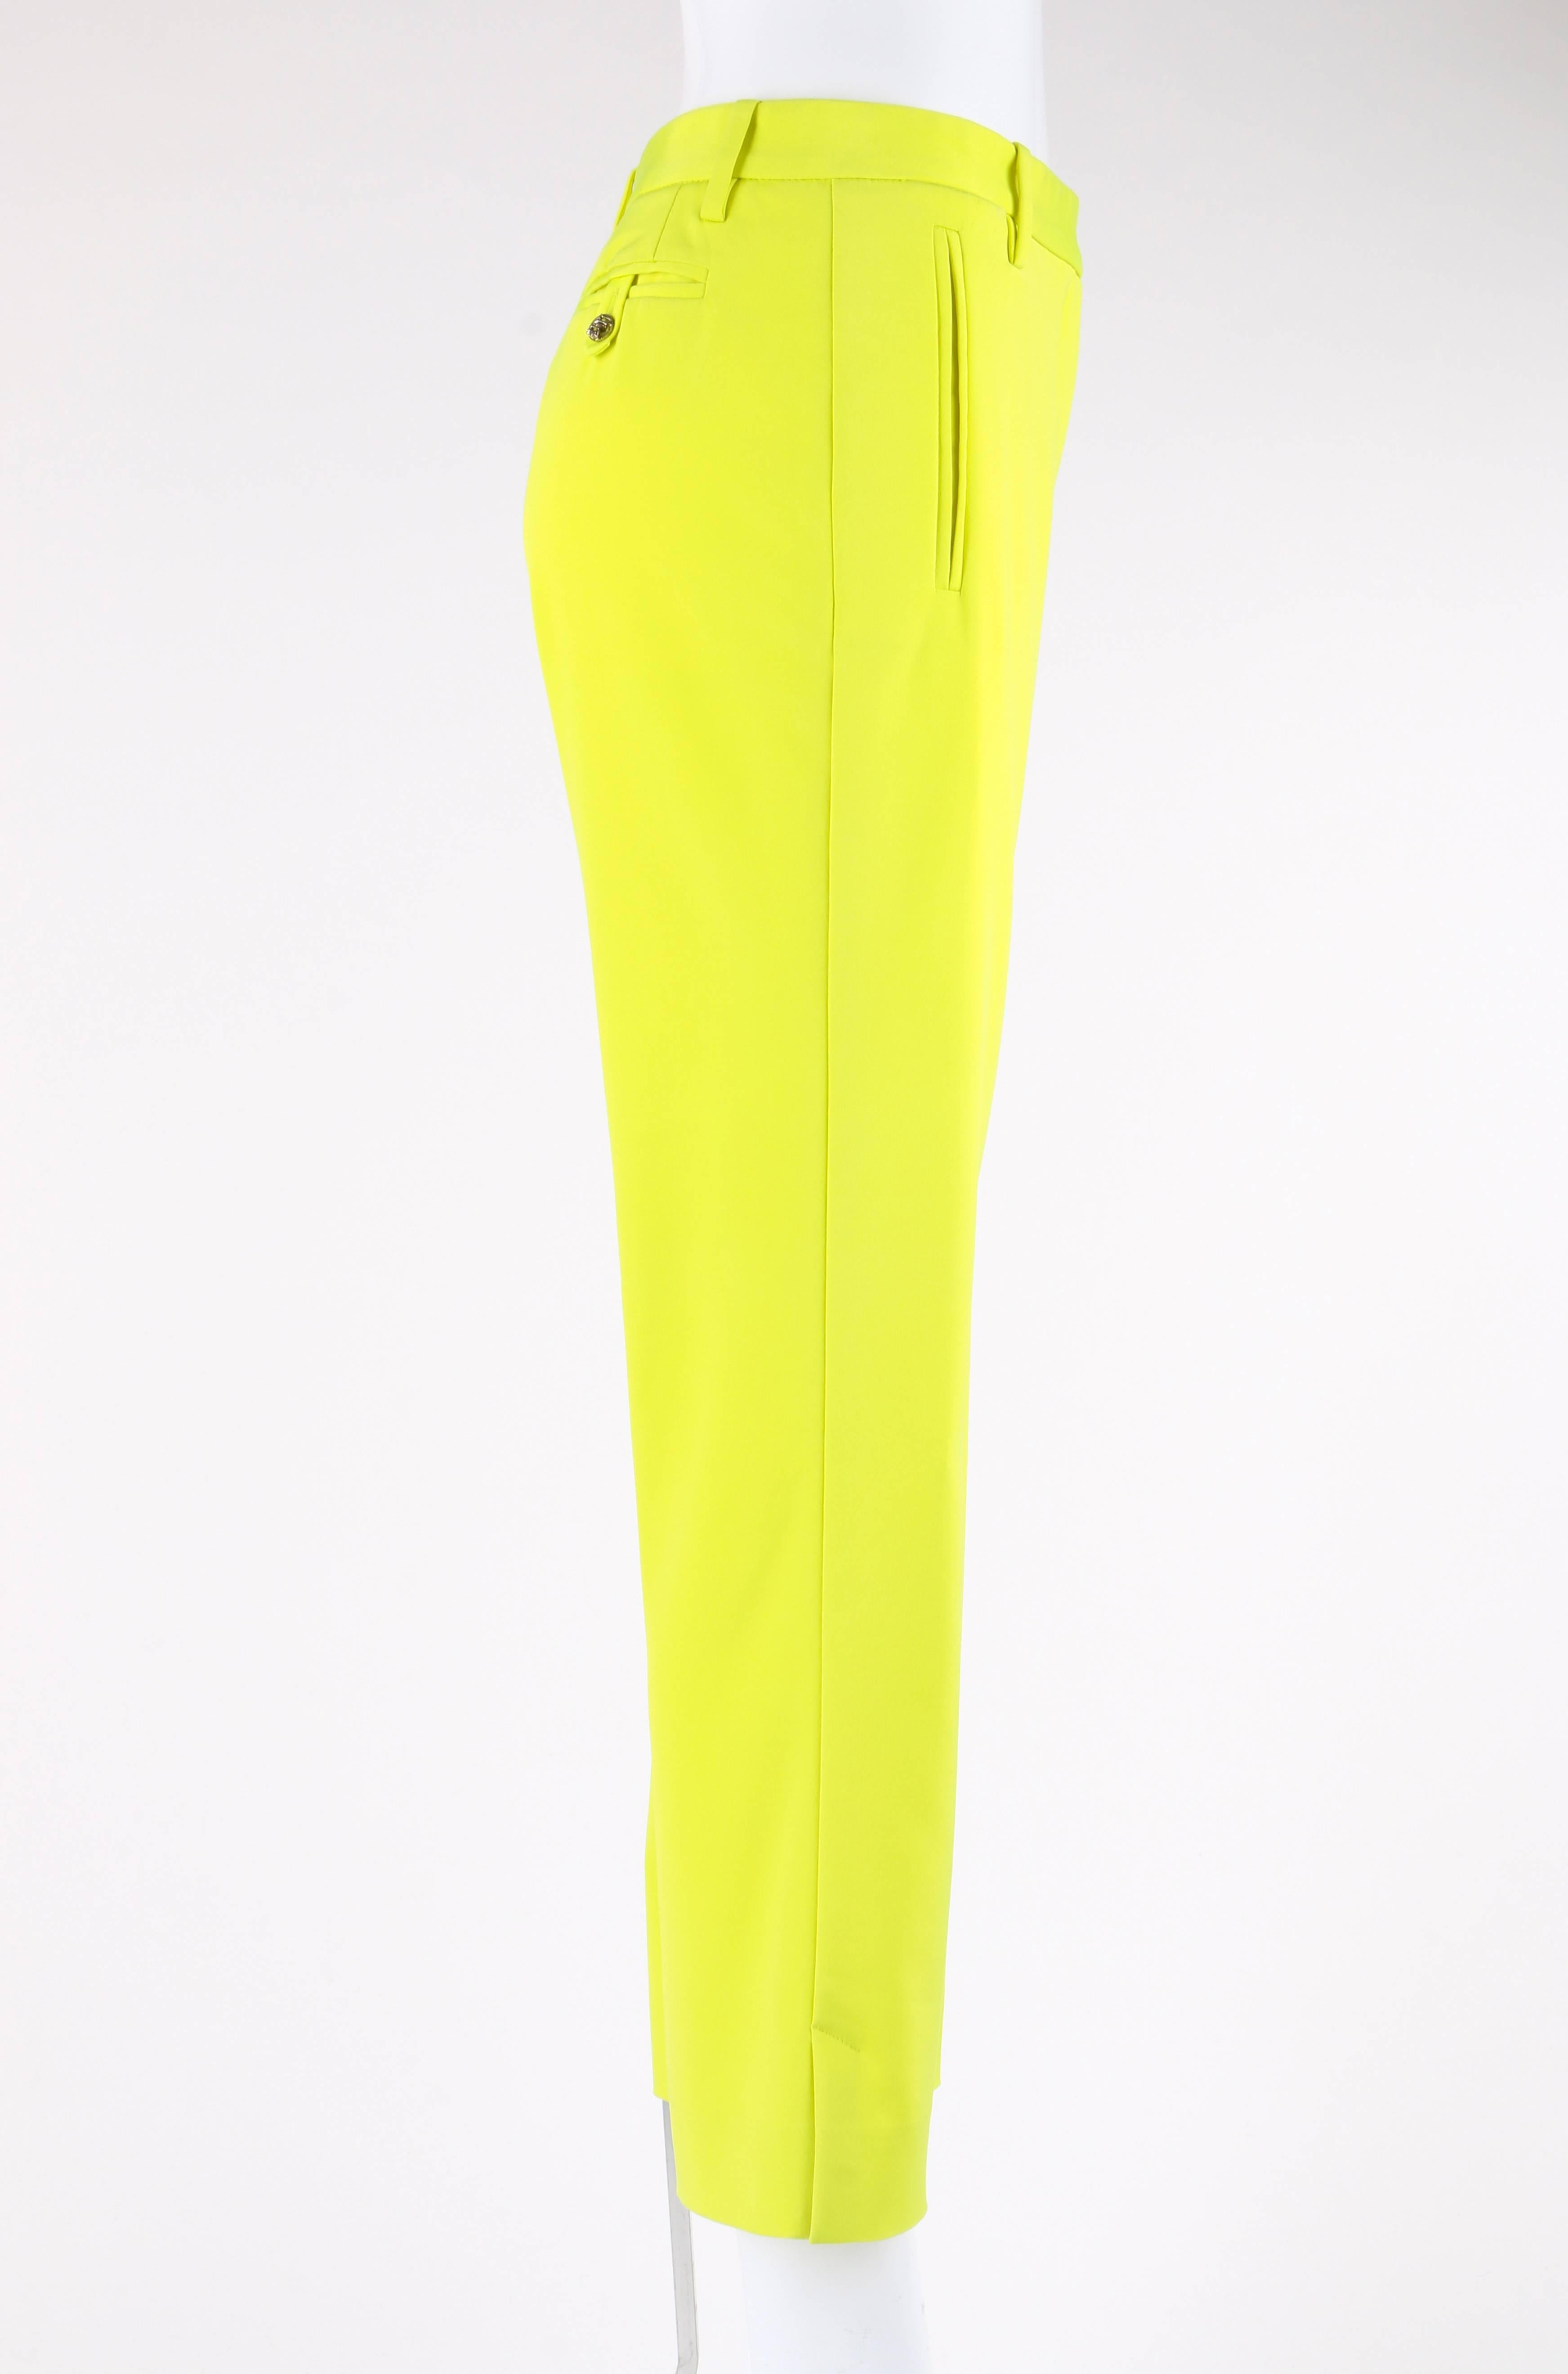 Versace Spring / Summer 2004 neon yellow silk cropped capri pants; New with tags. Runway look #4 designed by Donatella Versace. Thin banded waist. Five belt loops. Center front zip fly with exterior button and tab closure at top. Single interior